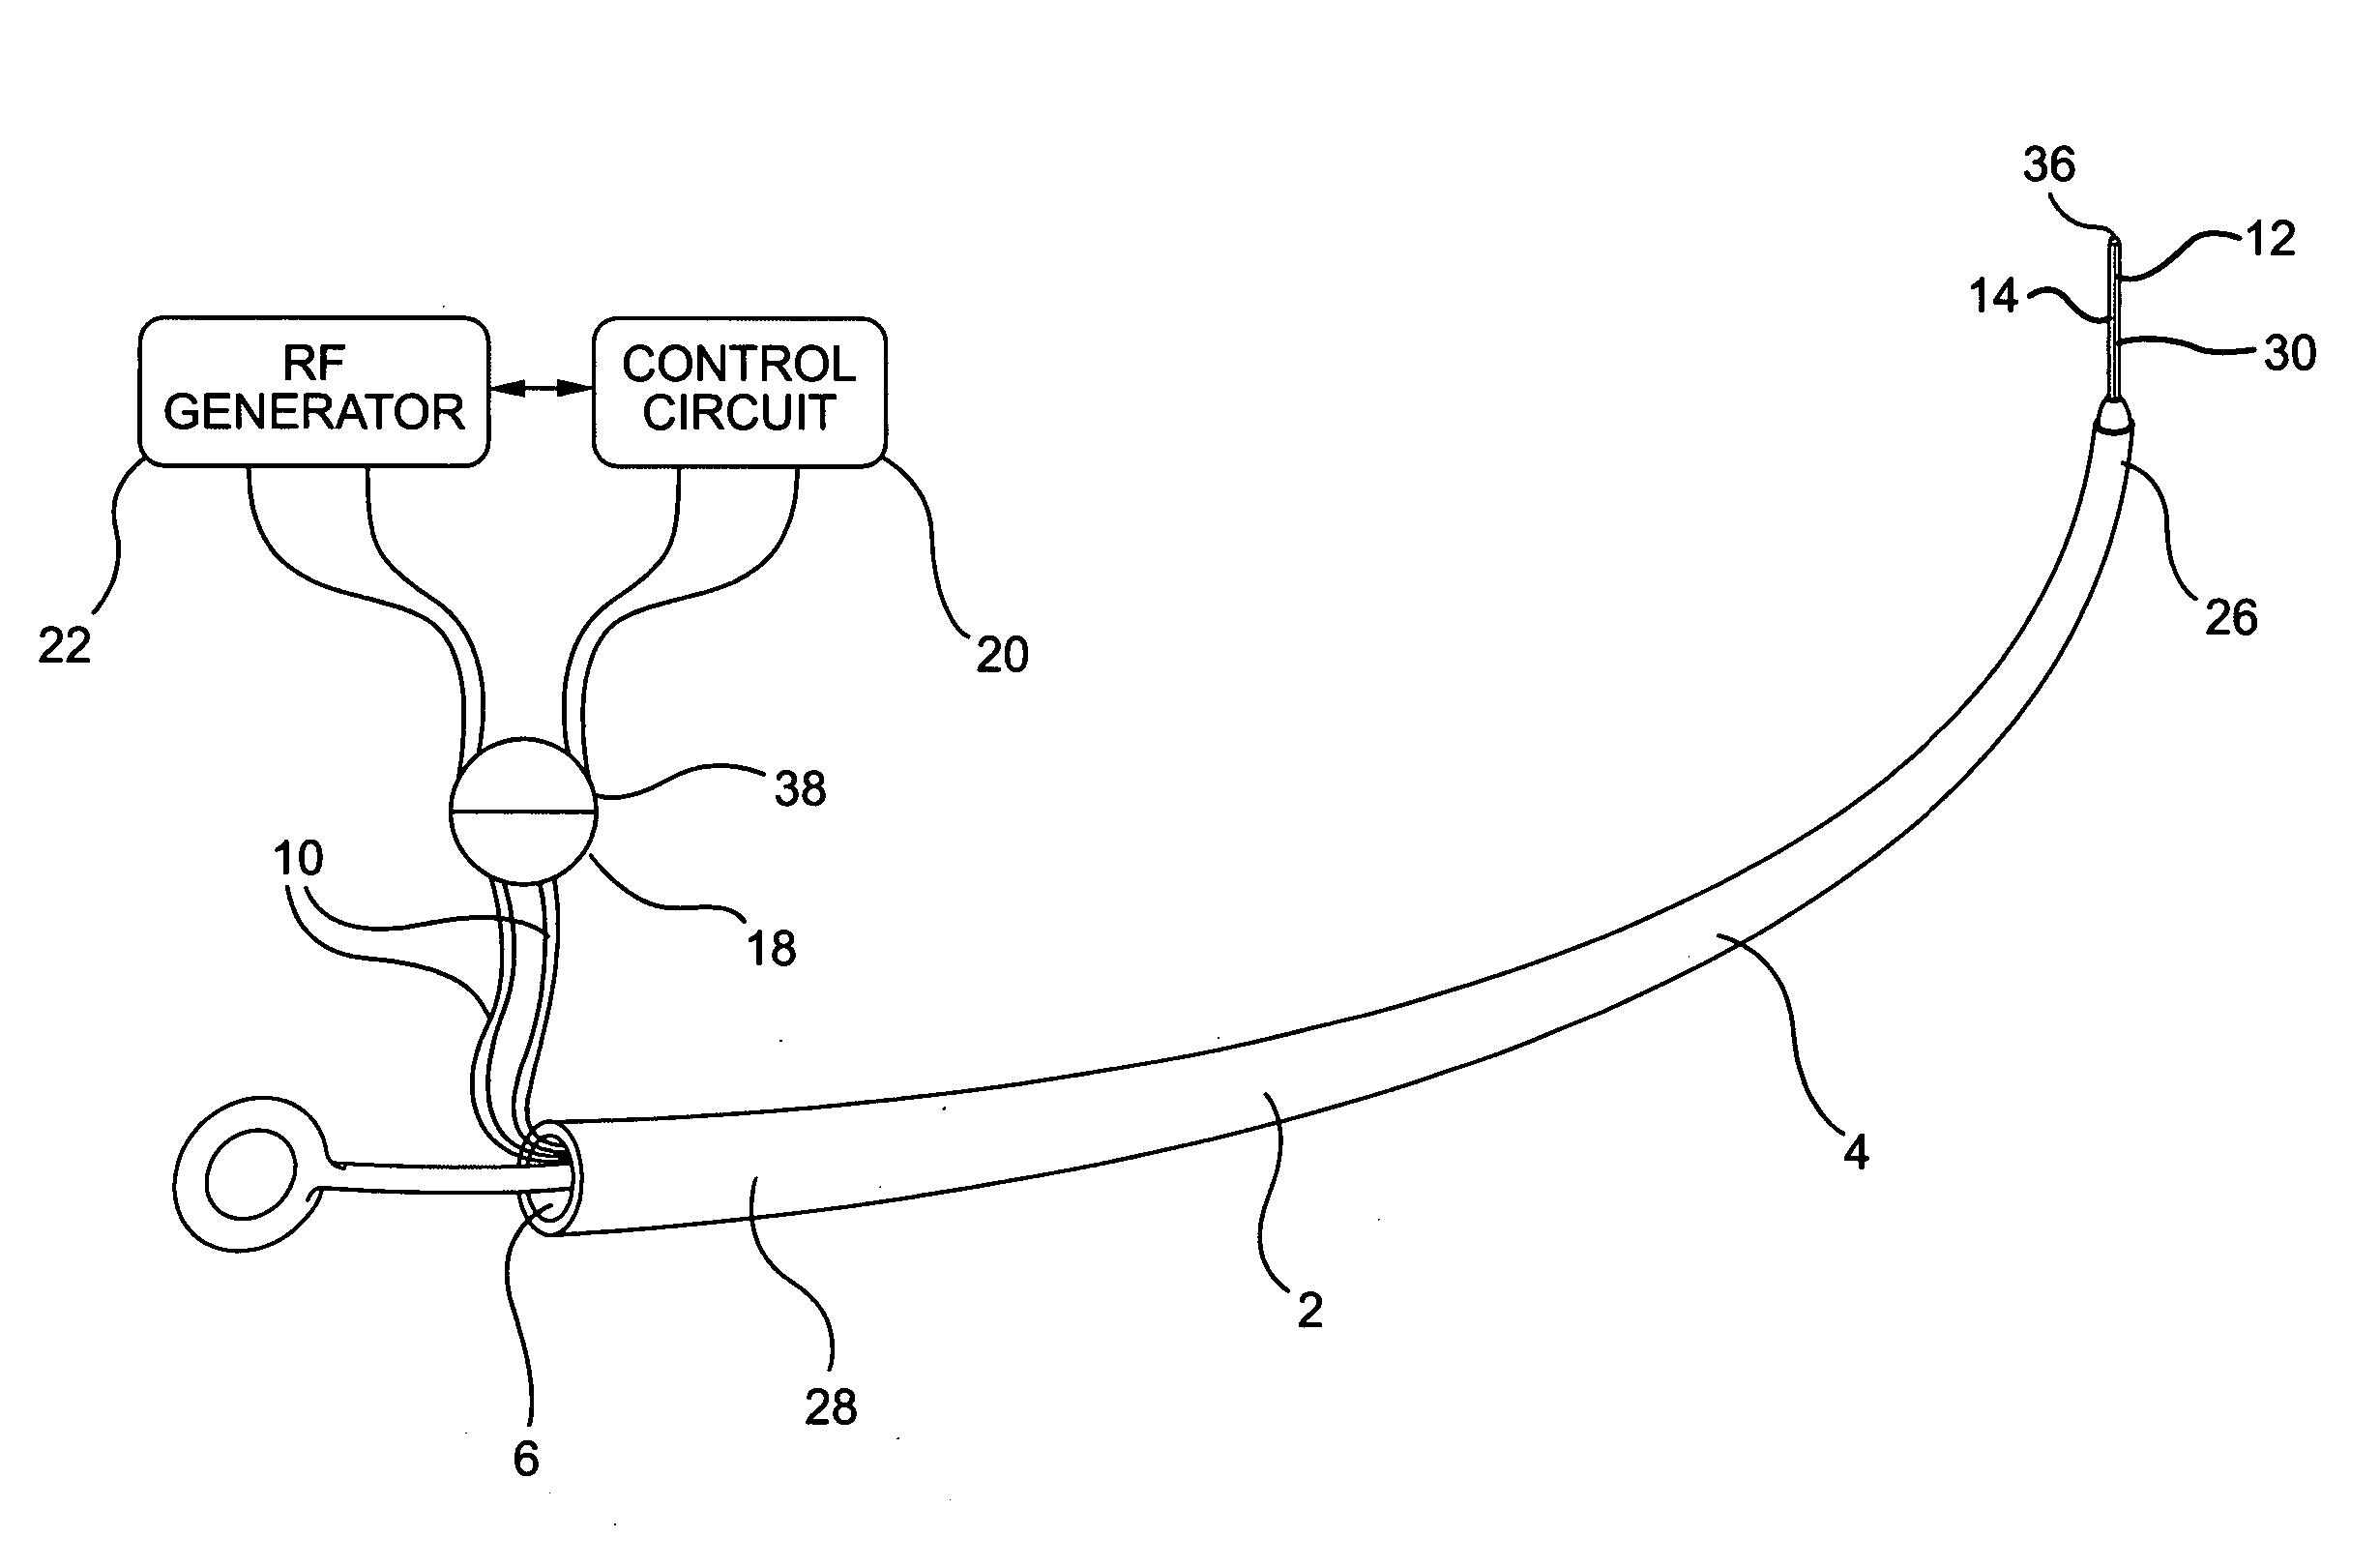 Tubal sterilization device having expanding electrodes and method for performing sterilization using the same